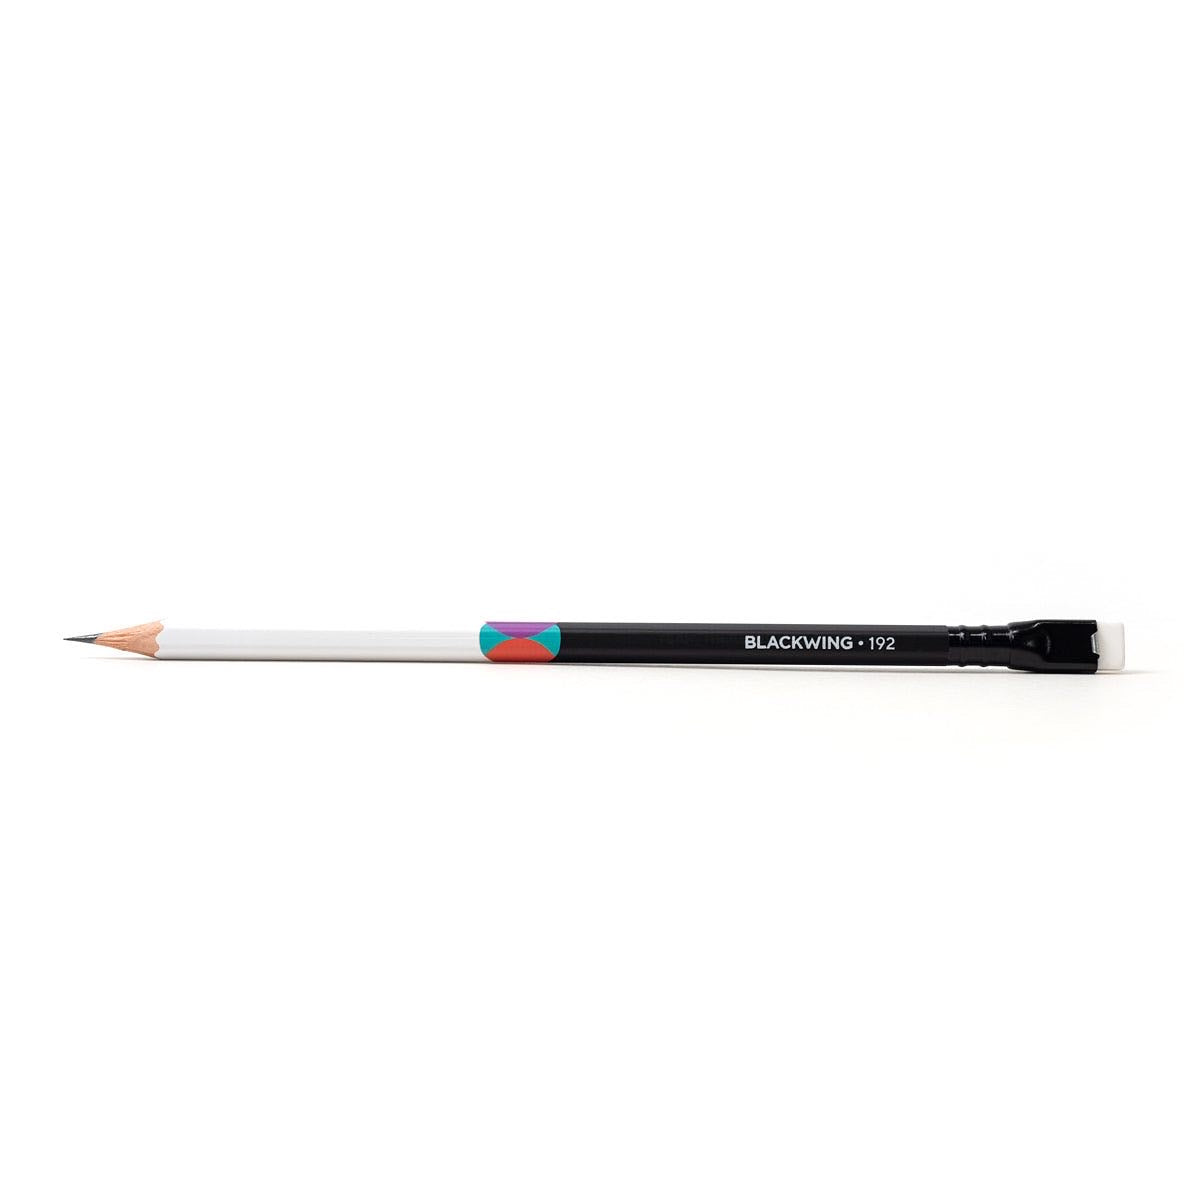 Blackwing volume 192 limited edition